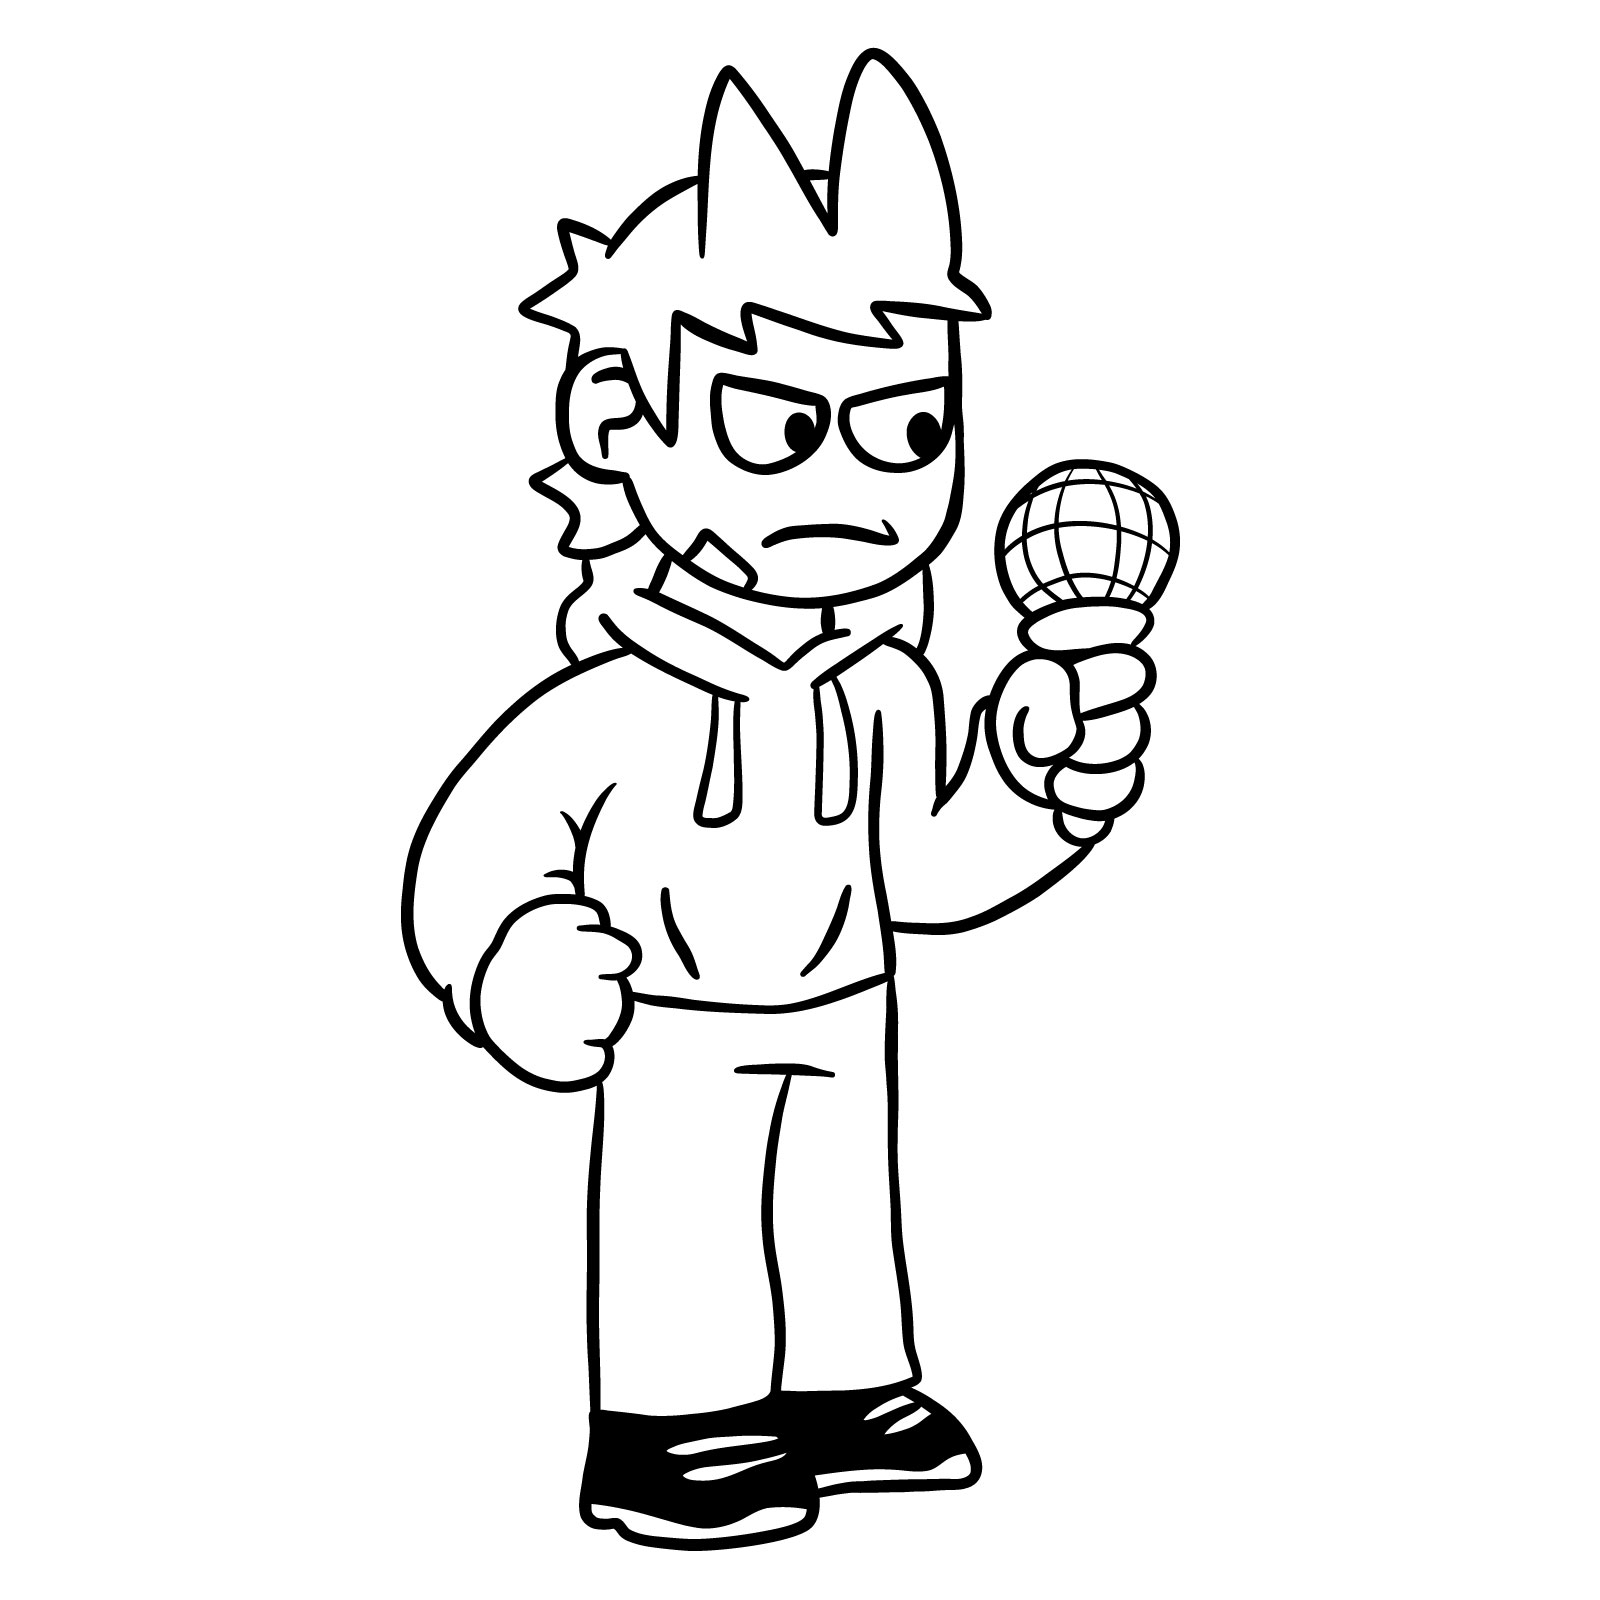 How to draw Tord from FNF - final step